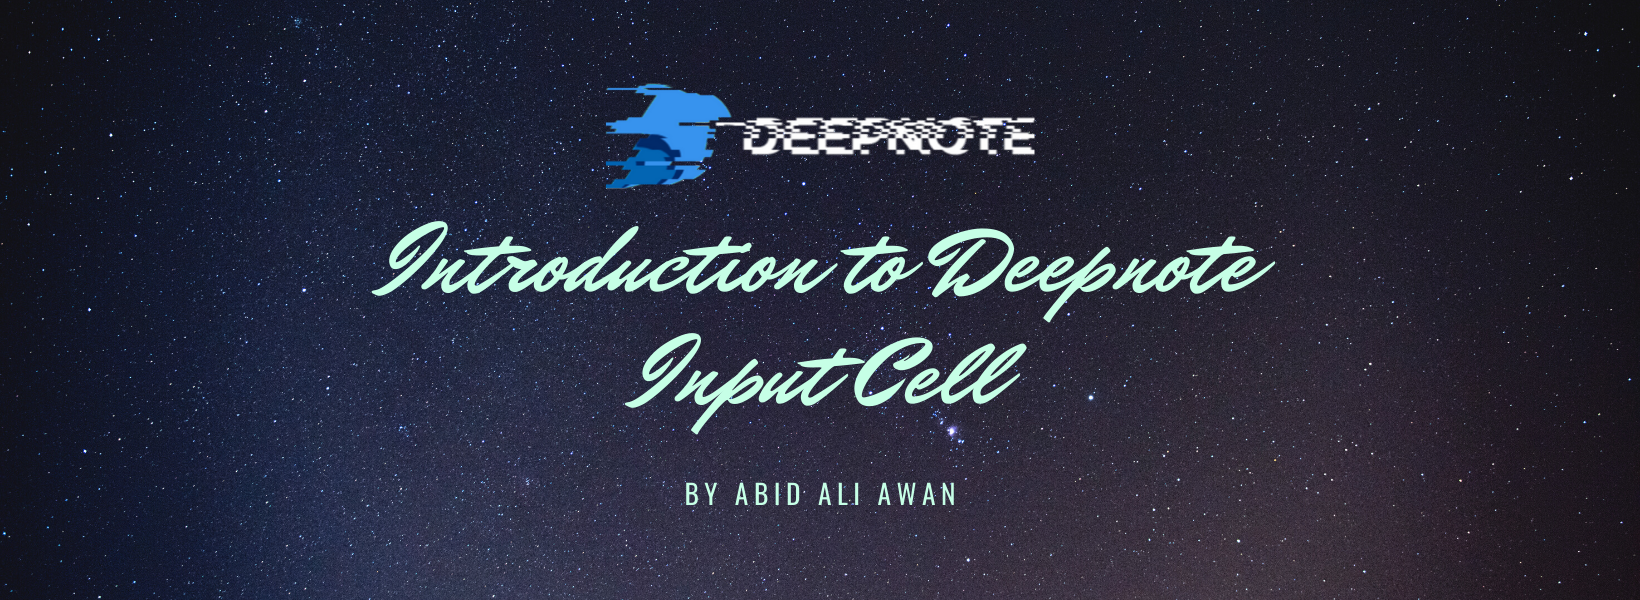 Introduction to Deepnote Input Cells – image